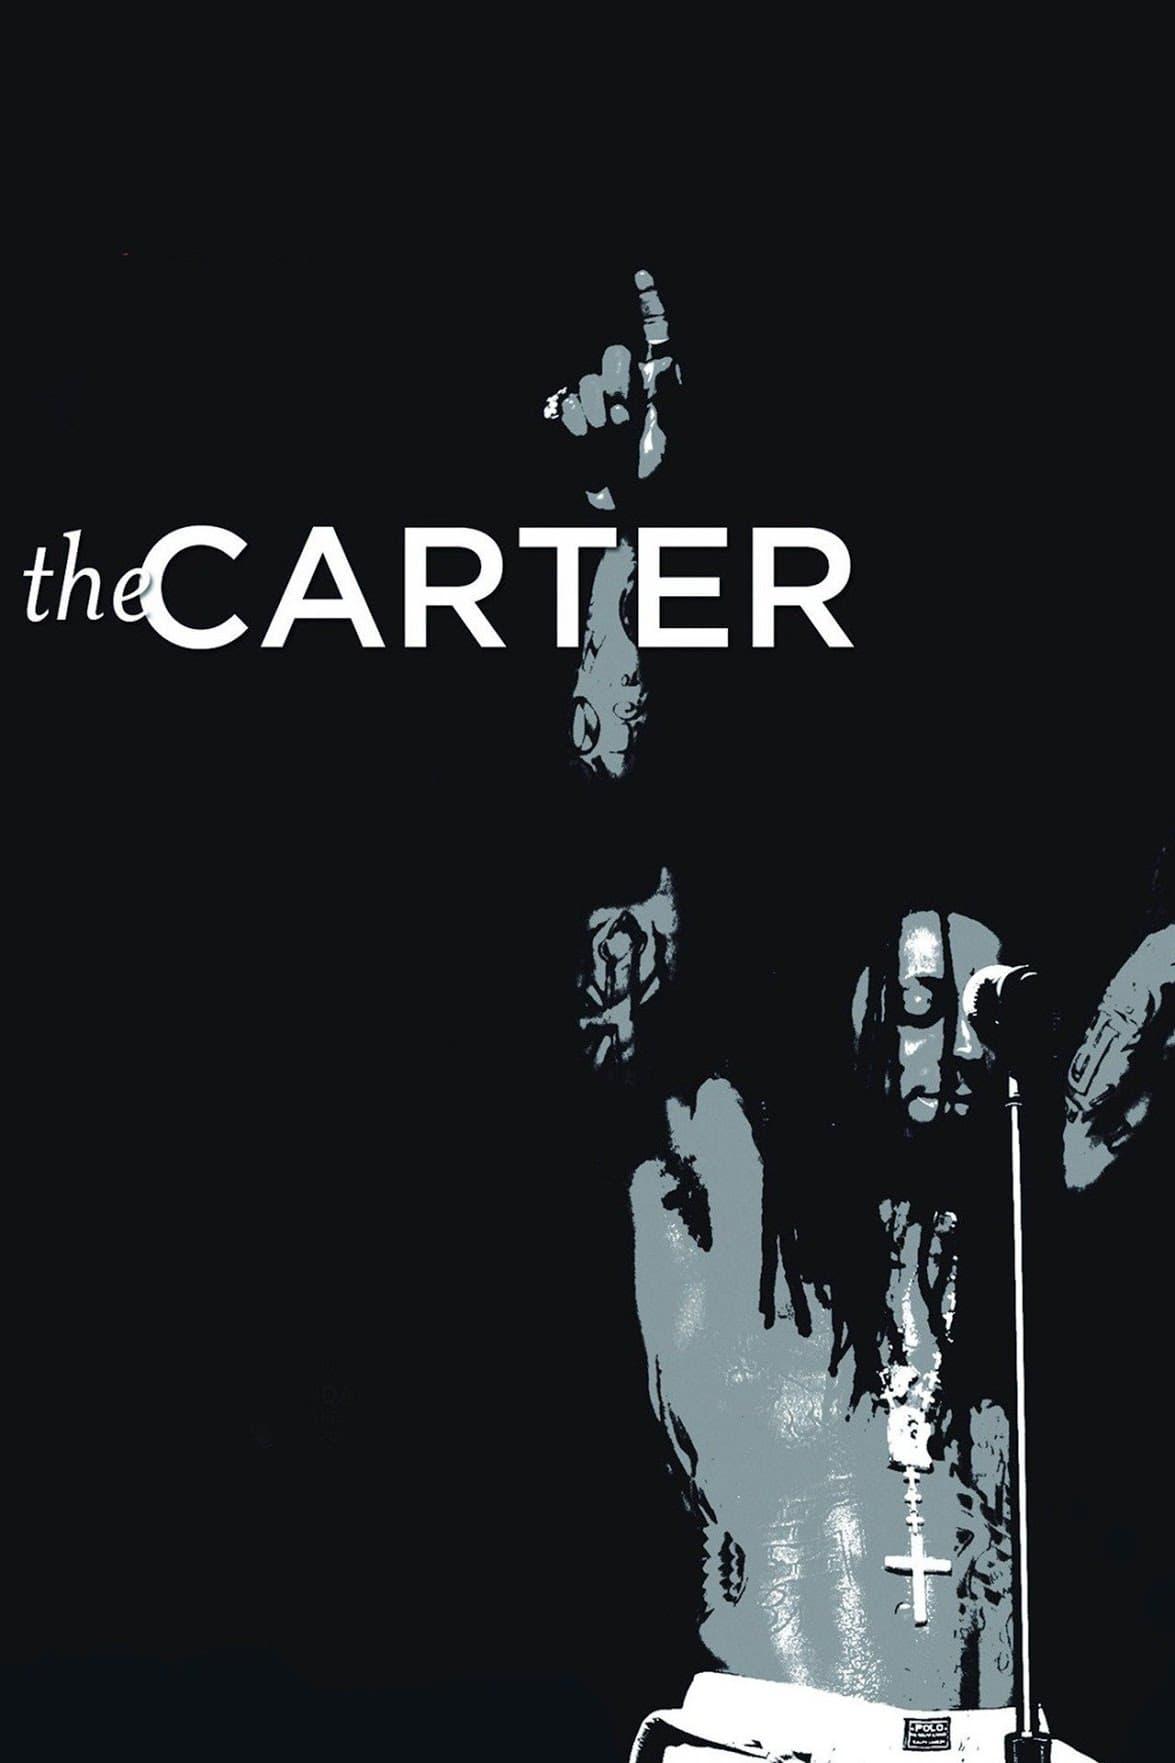 The Carter poster